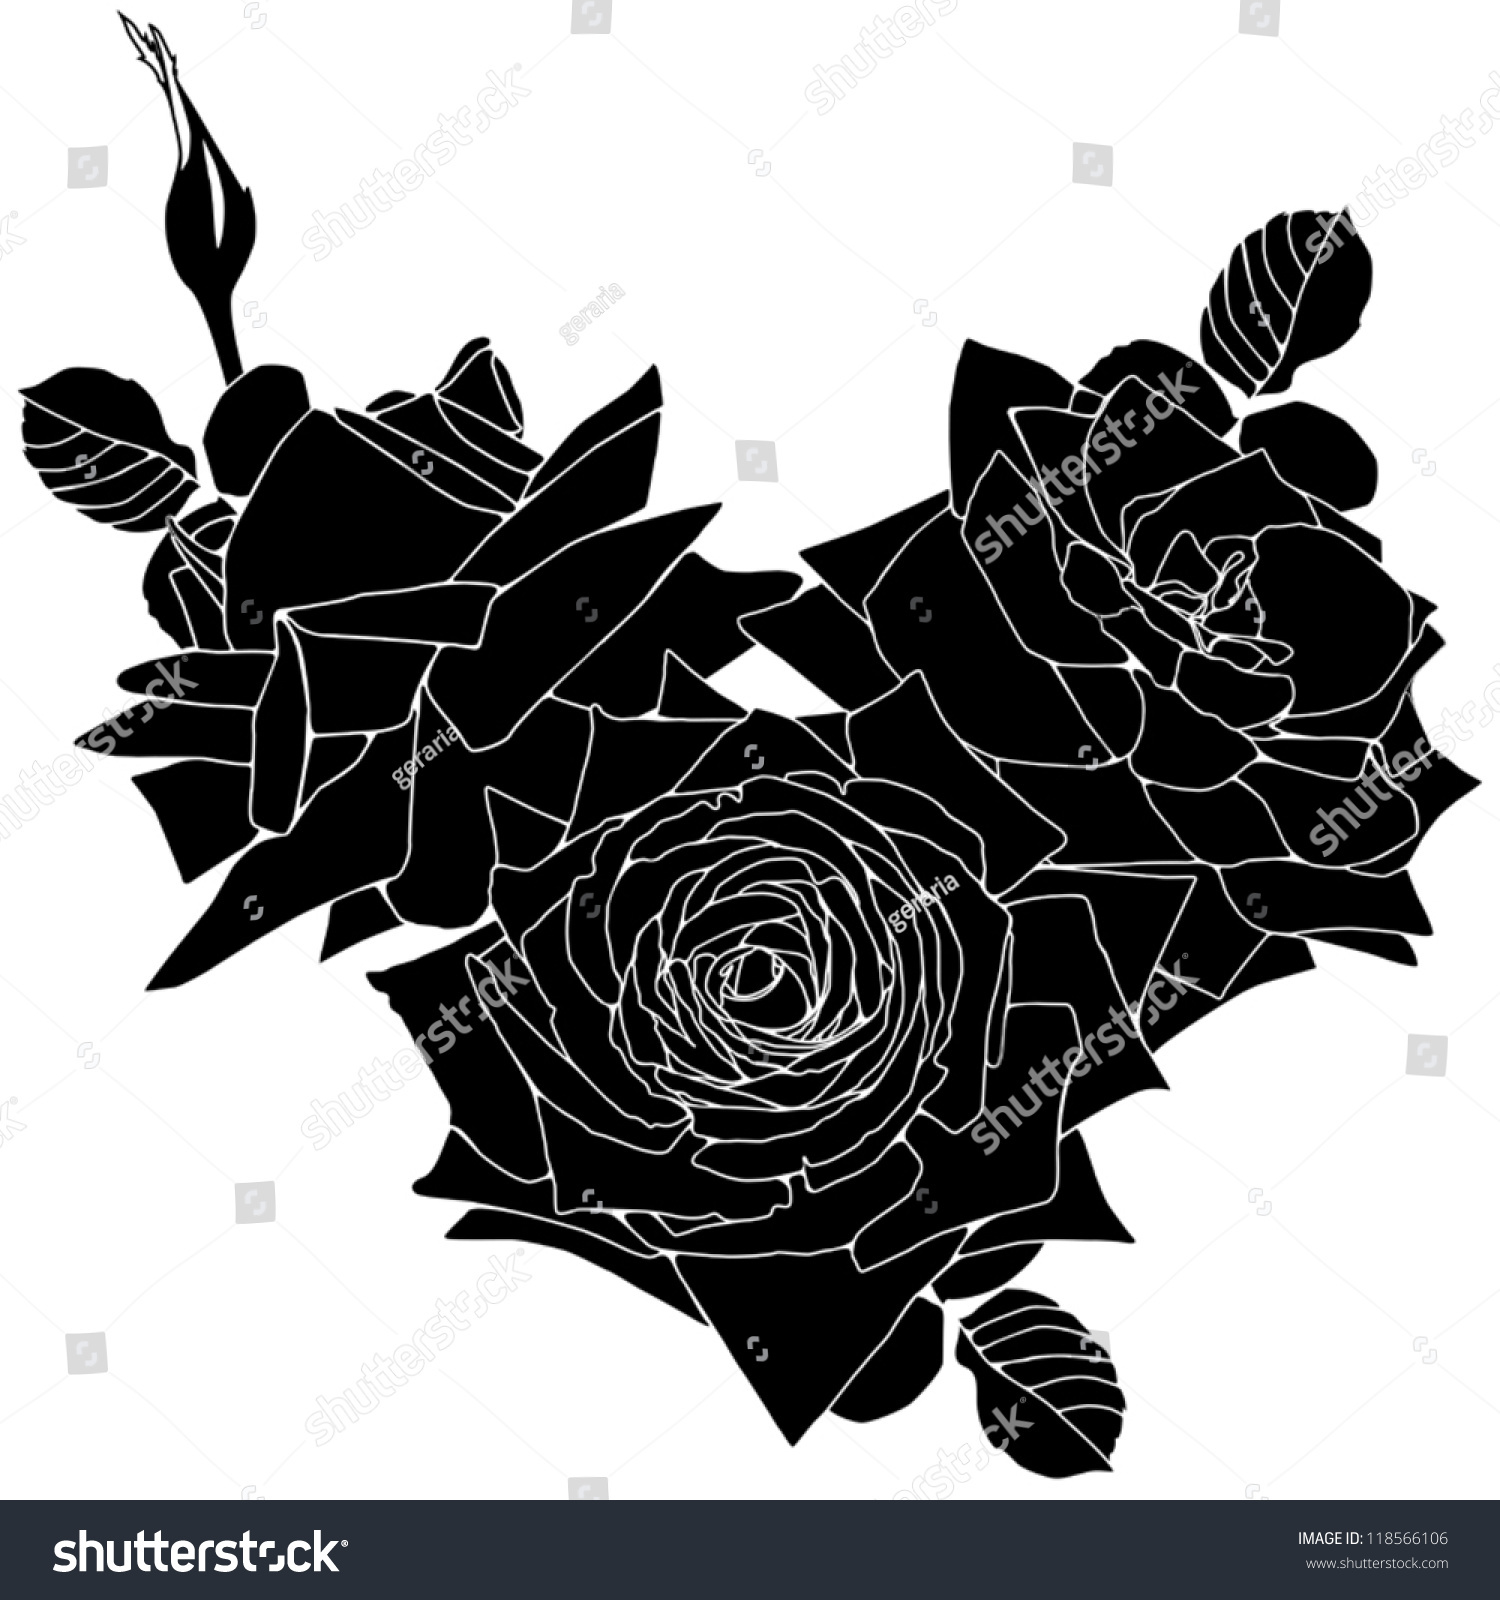 Black Roses And Hearts